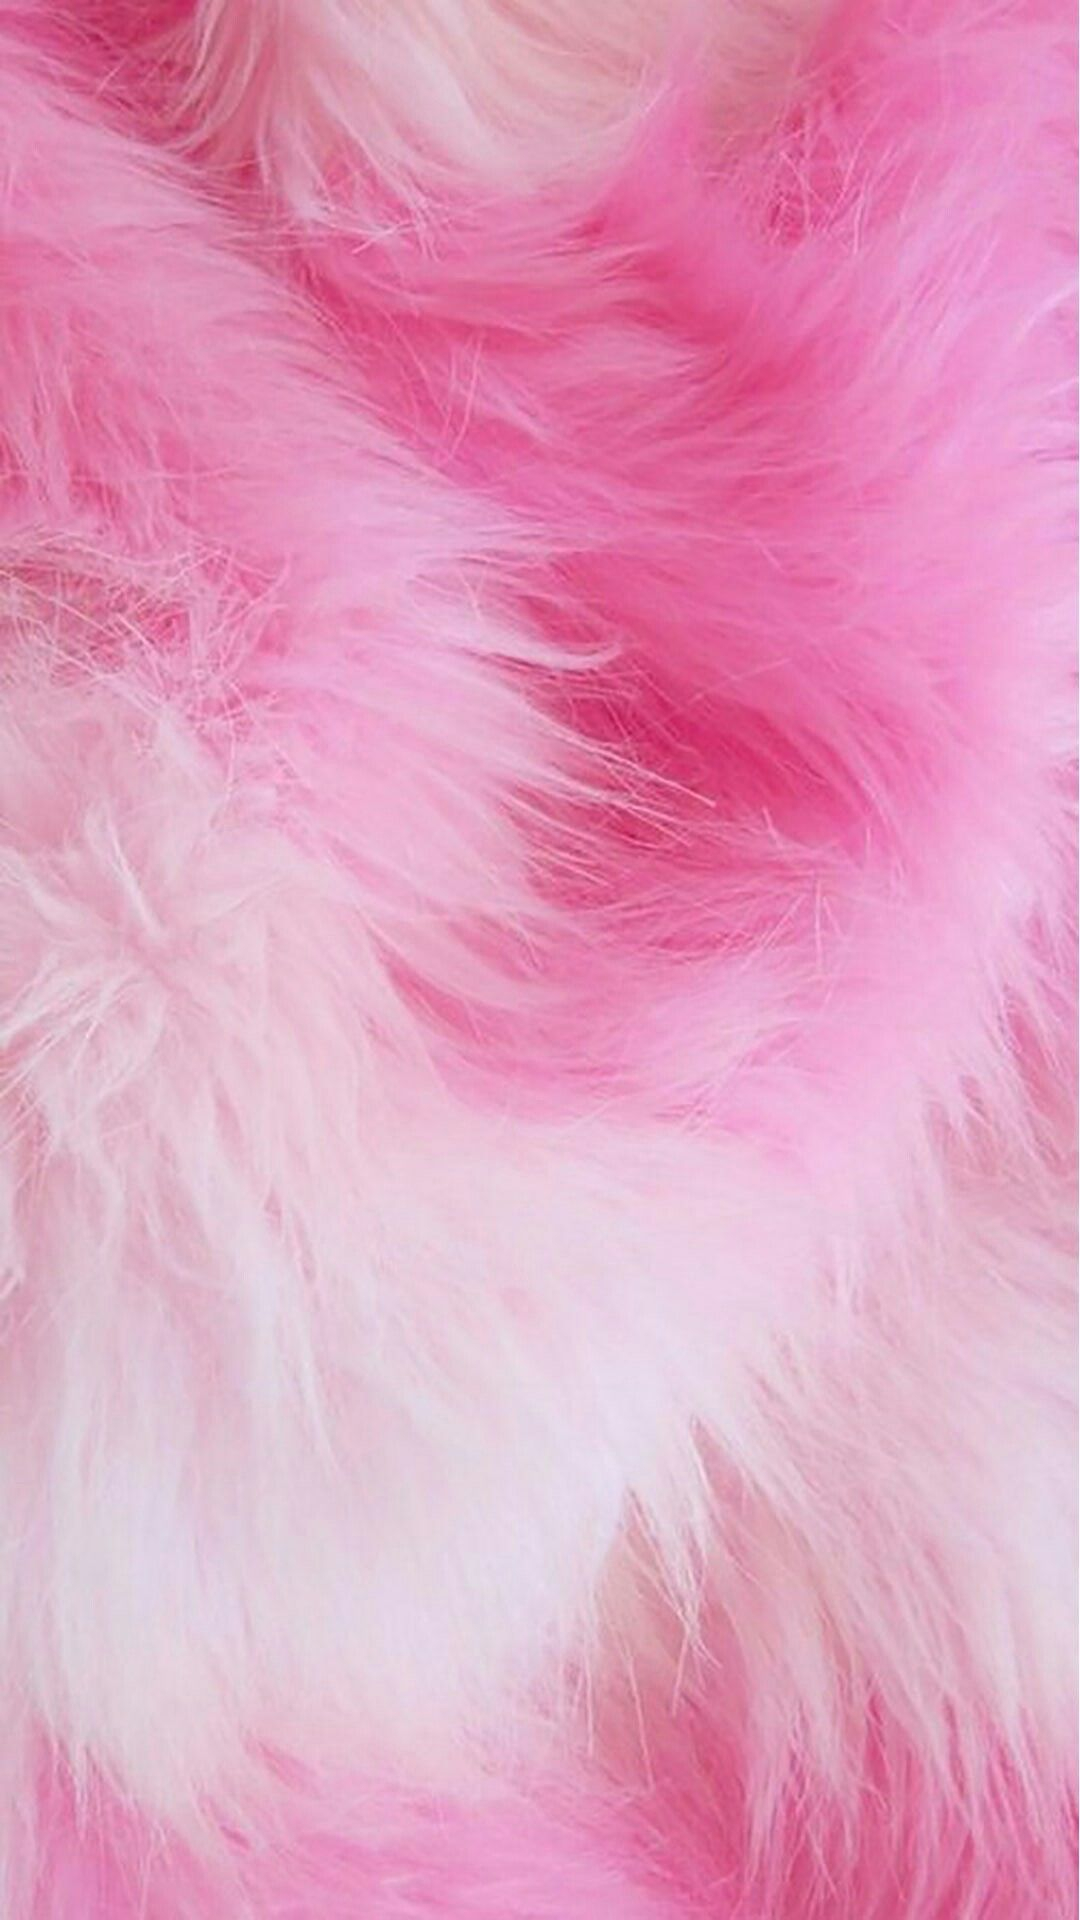 1080x1920 Pink Fur Wallpapers Top Free Pink Fur Backgrounds